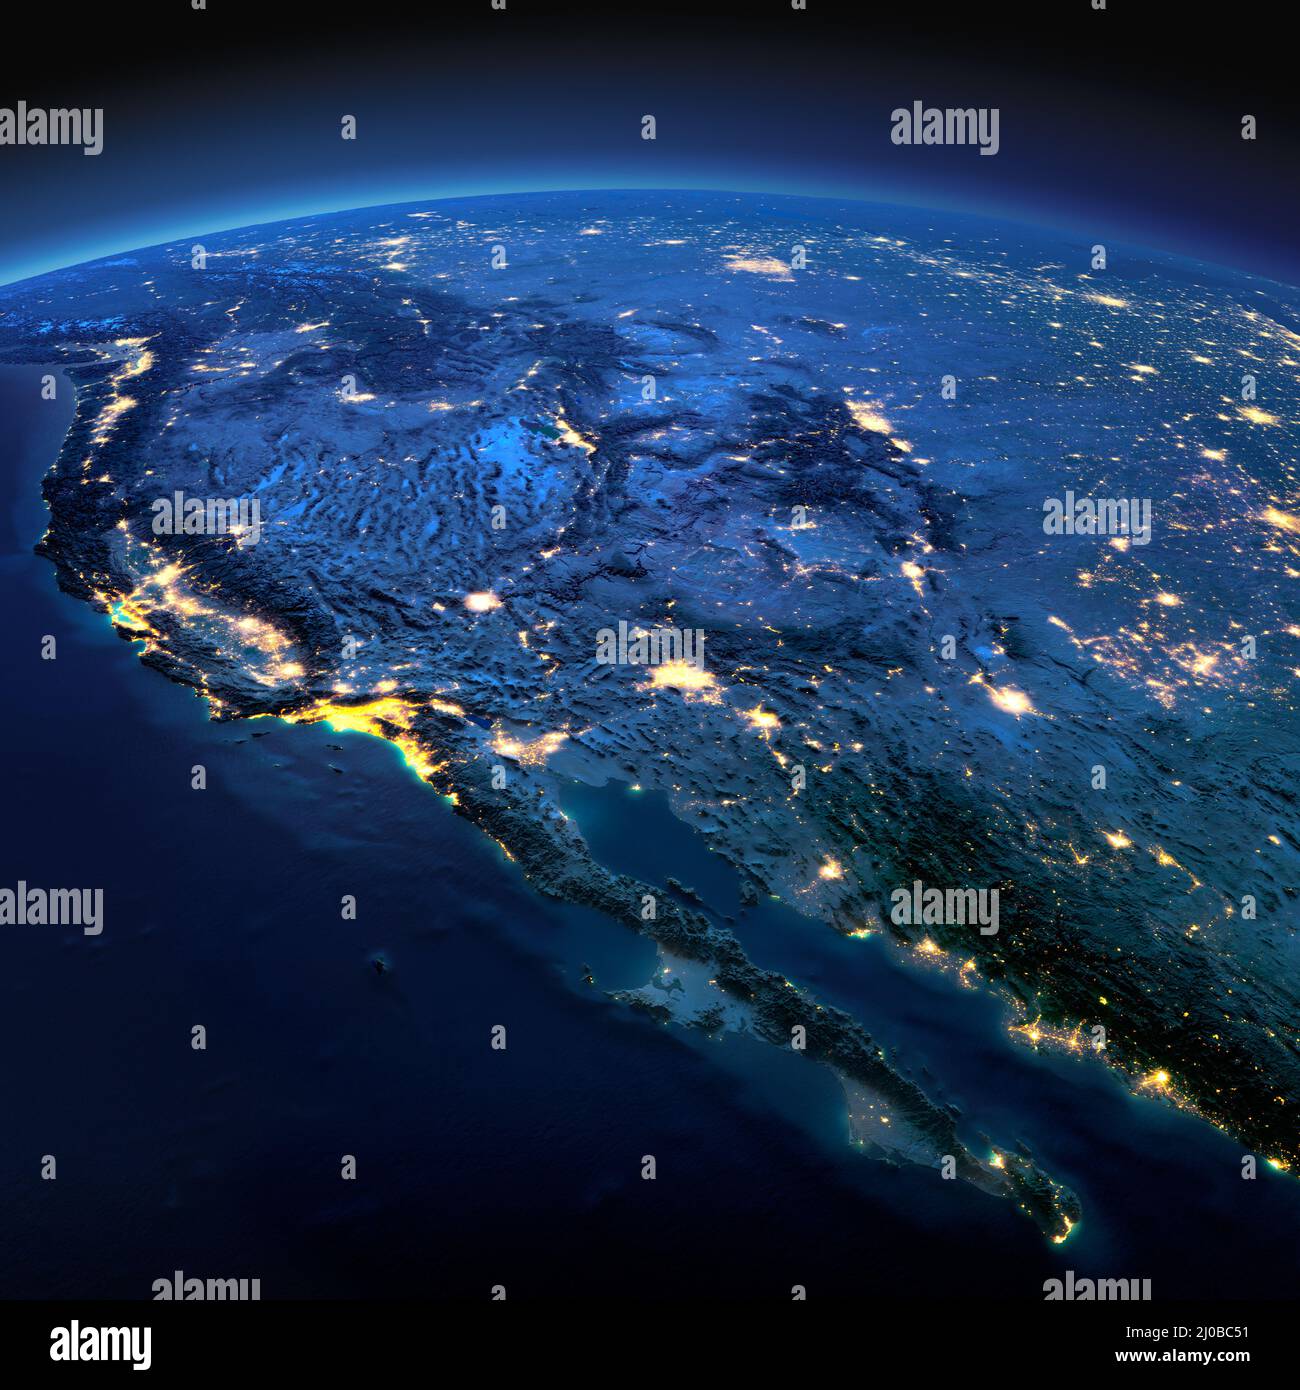 Detailed Earth. Gulf of California, Mexico and the western U.S. states Stock Photo